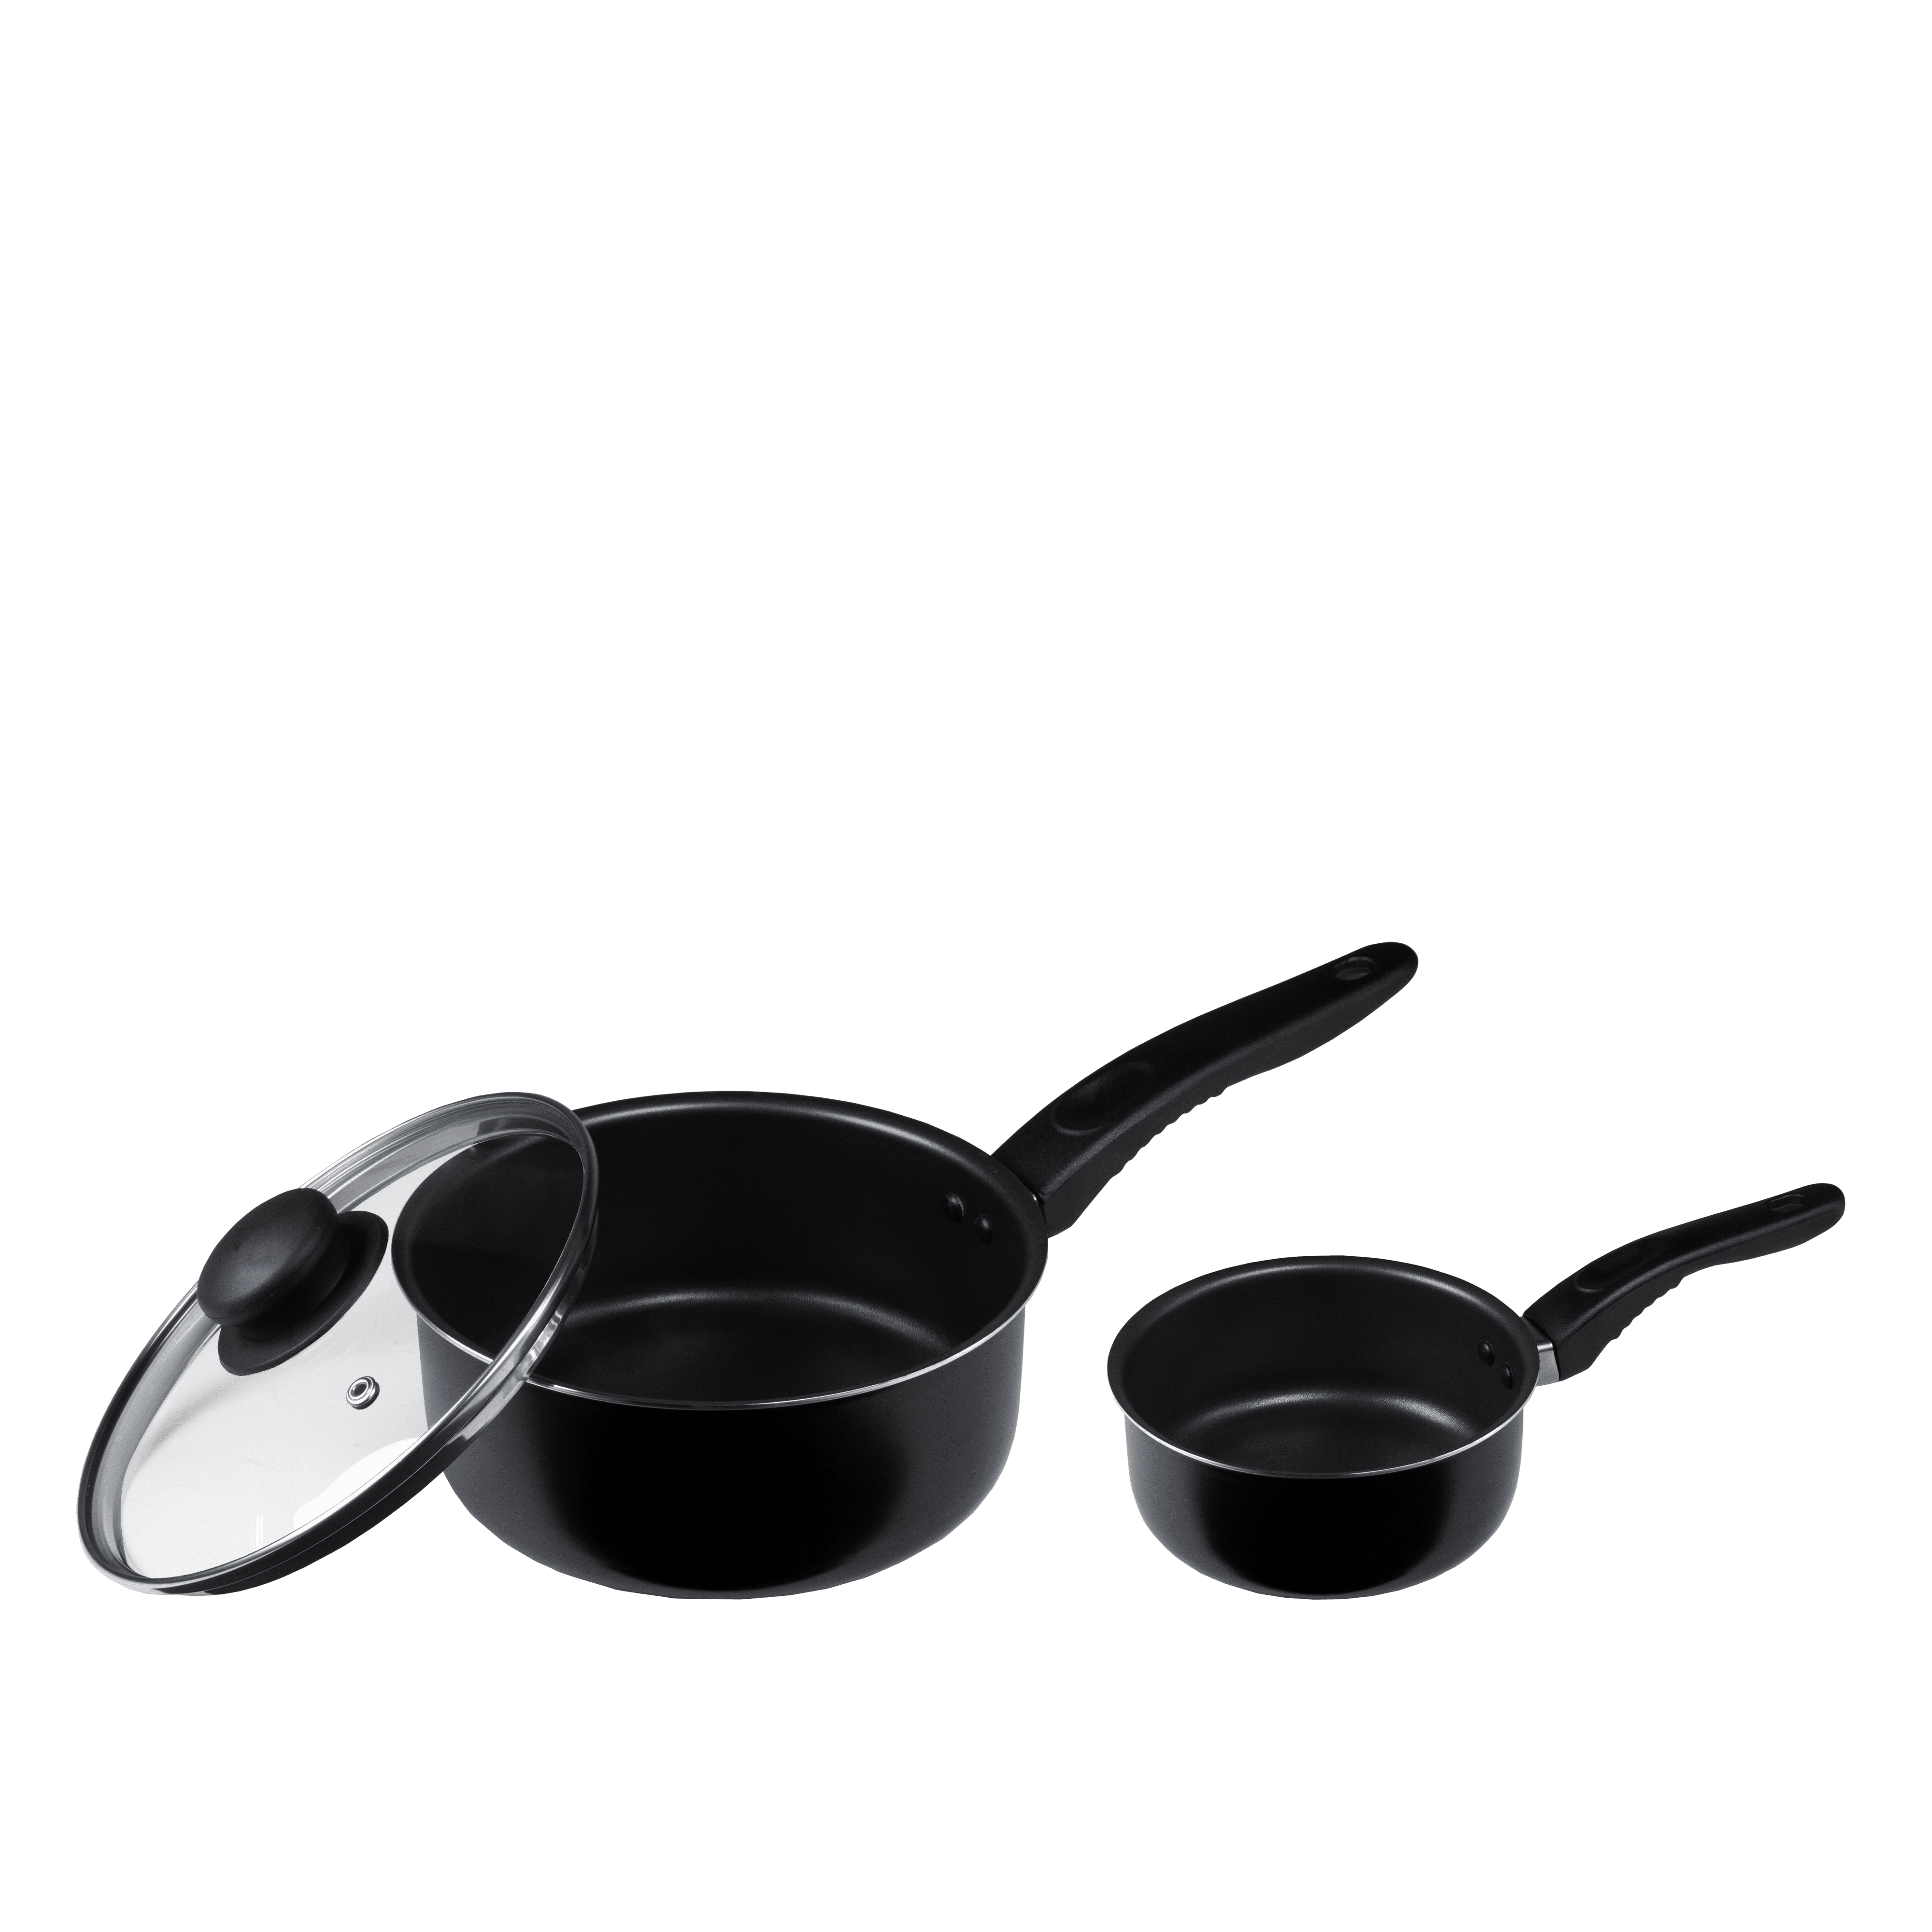 3 In 1 SUS 316 Stainless Steel Non-Stick Sasite Wok, Pot And Pan Kitchen  Cookware Set